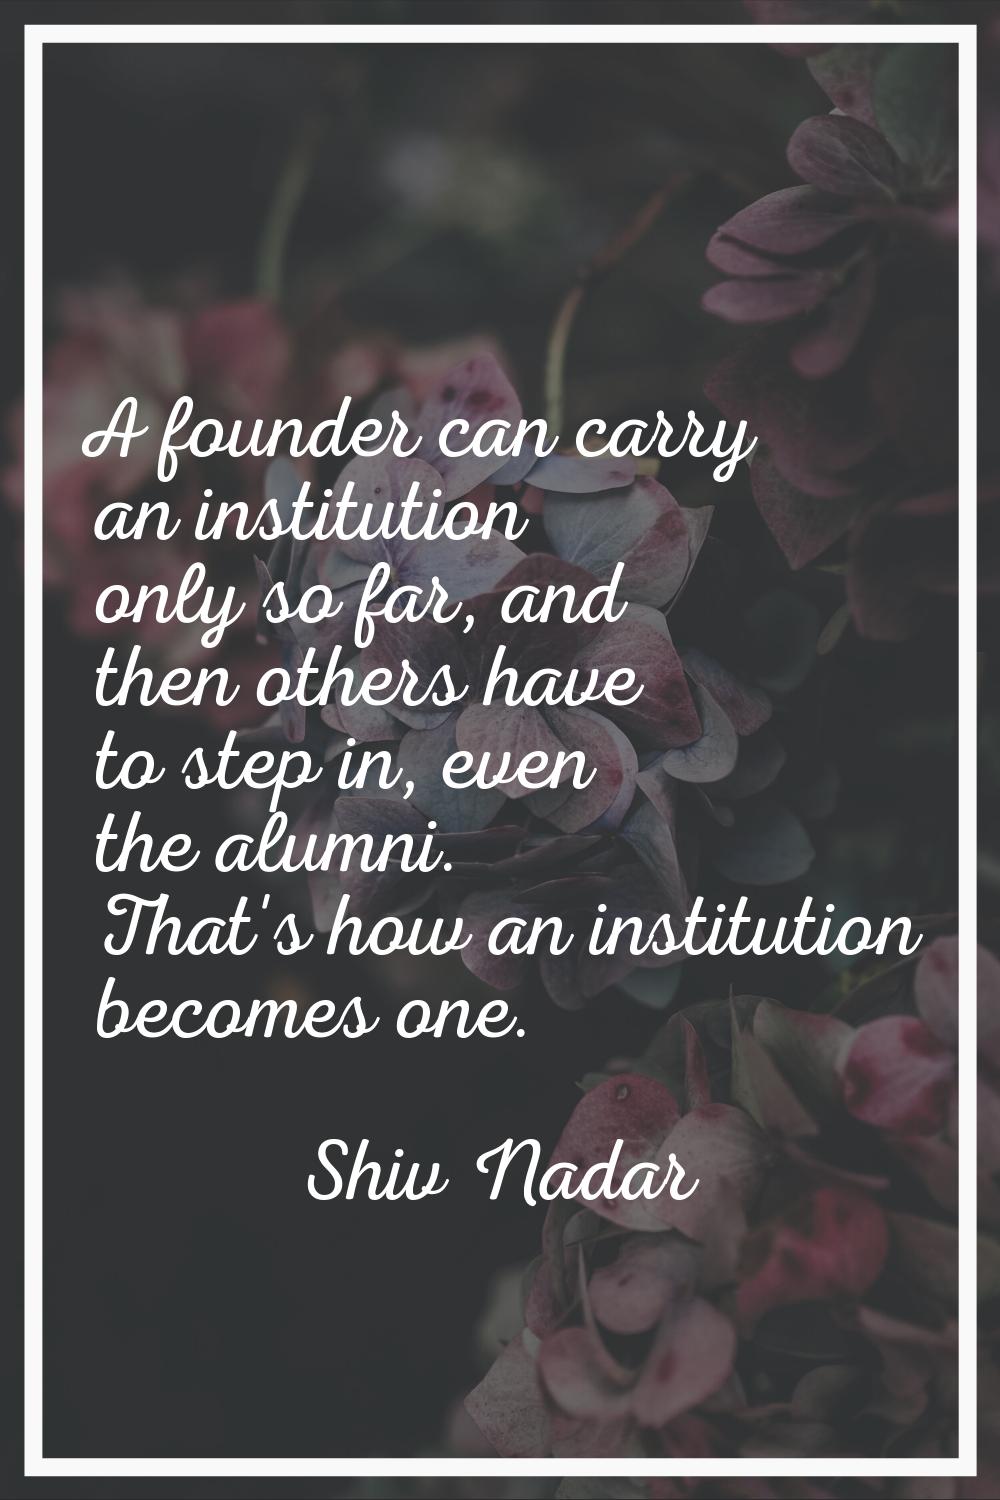 A founder can carry an institution only so far, and then others have to step in, even the alumni. T